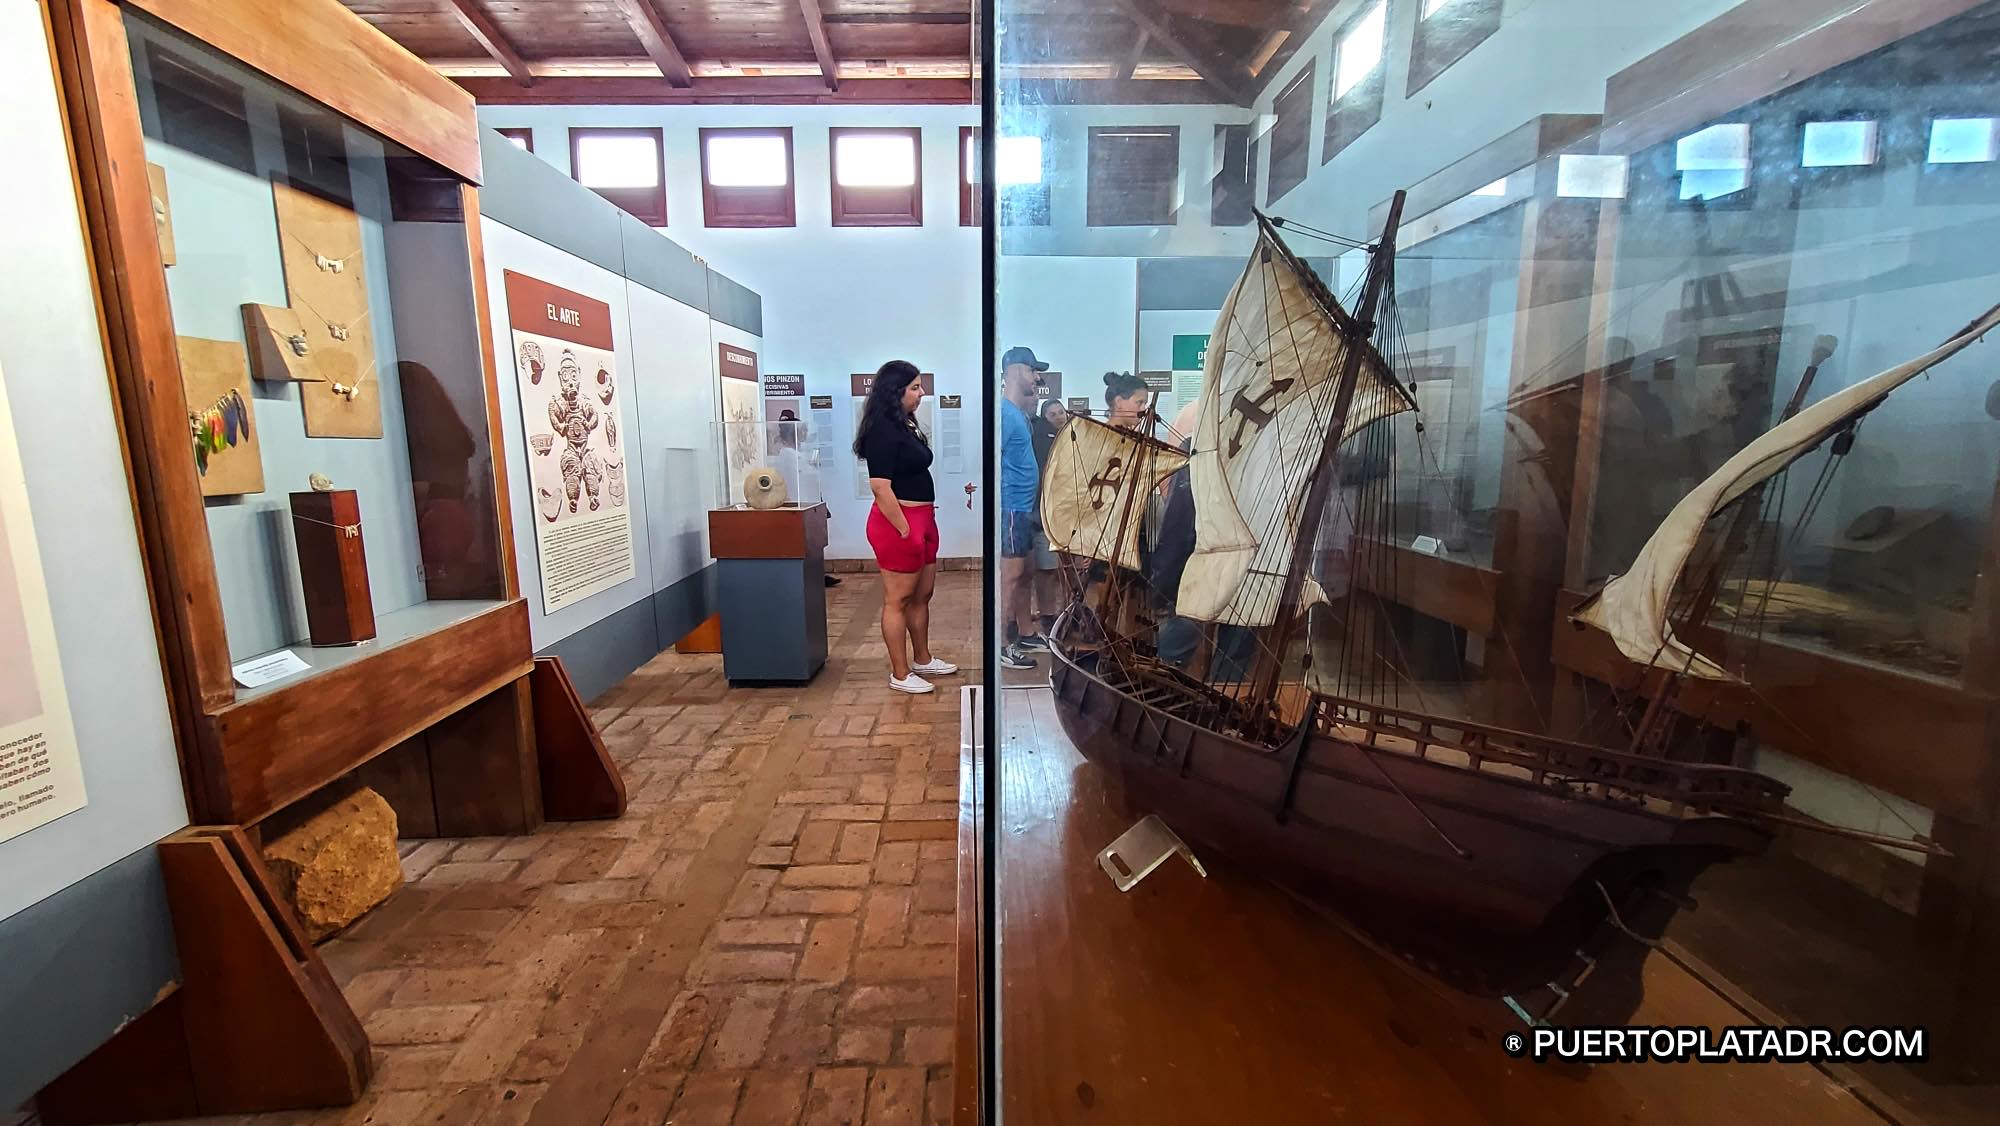 Spanish tourists take the tour of La Isabela museum in Puerto Plata DR